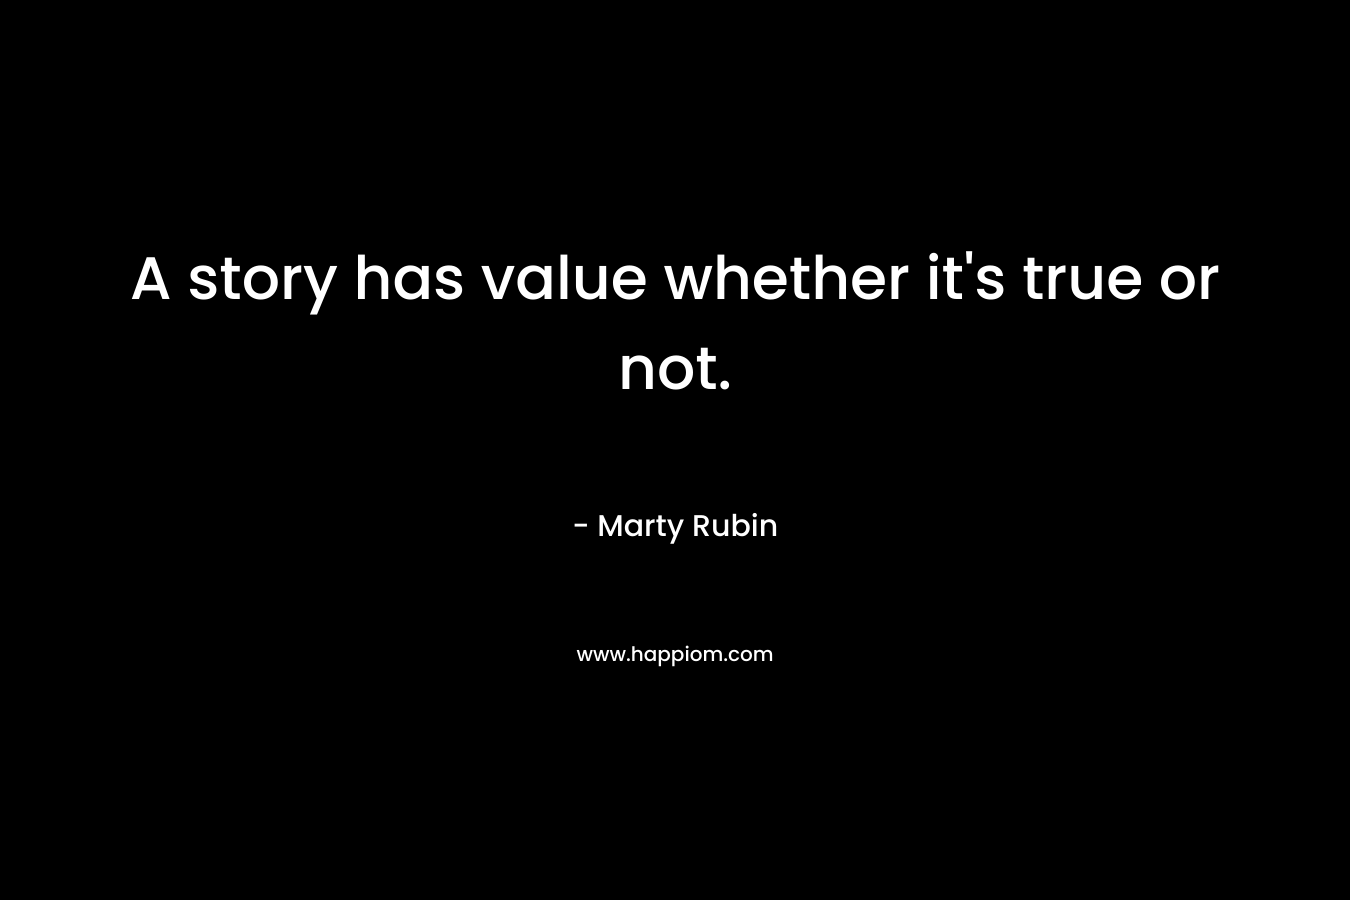 A story has value whether it's true or not.